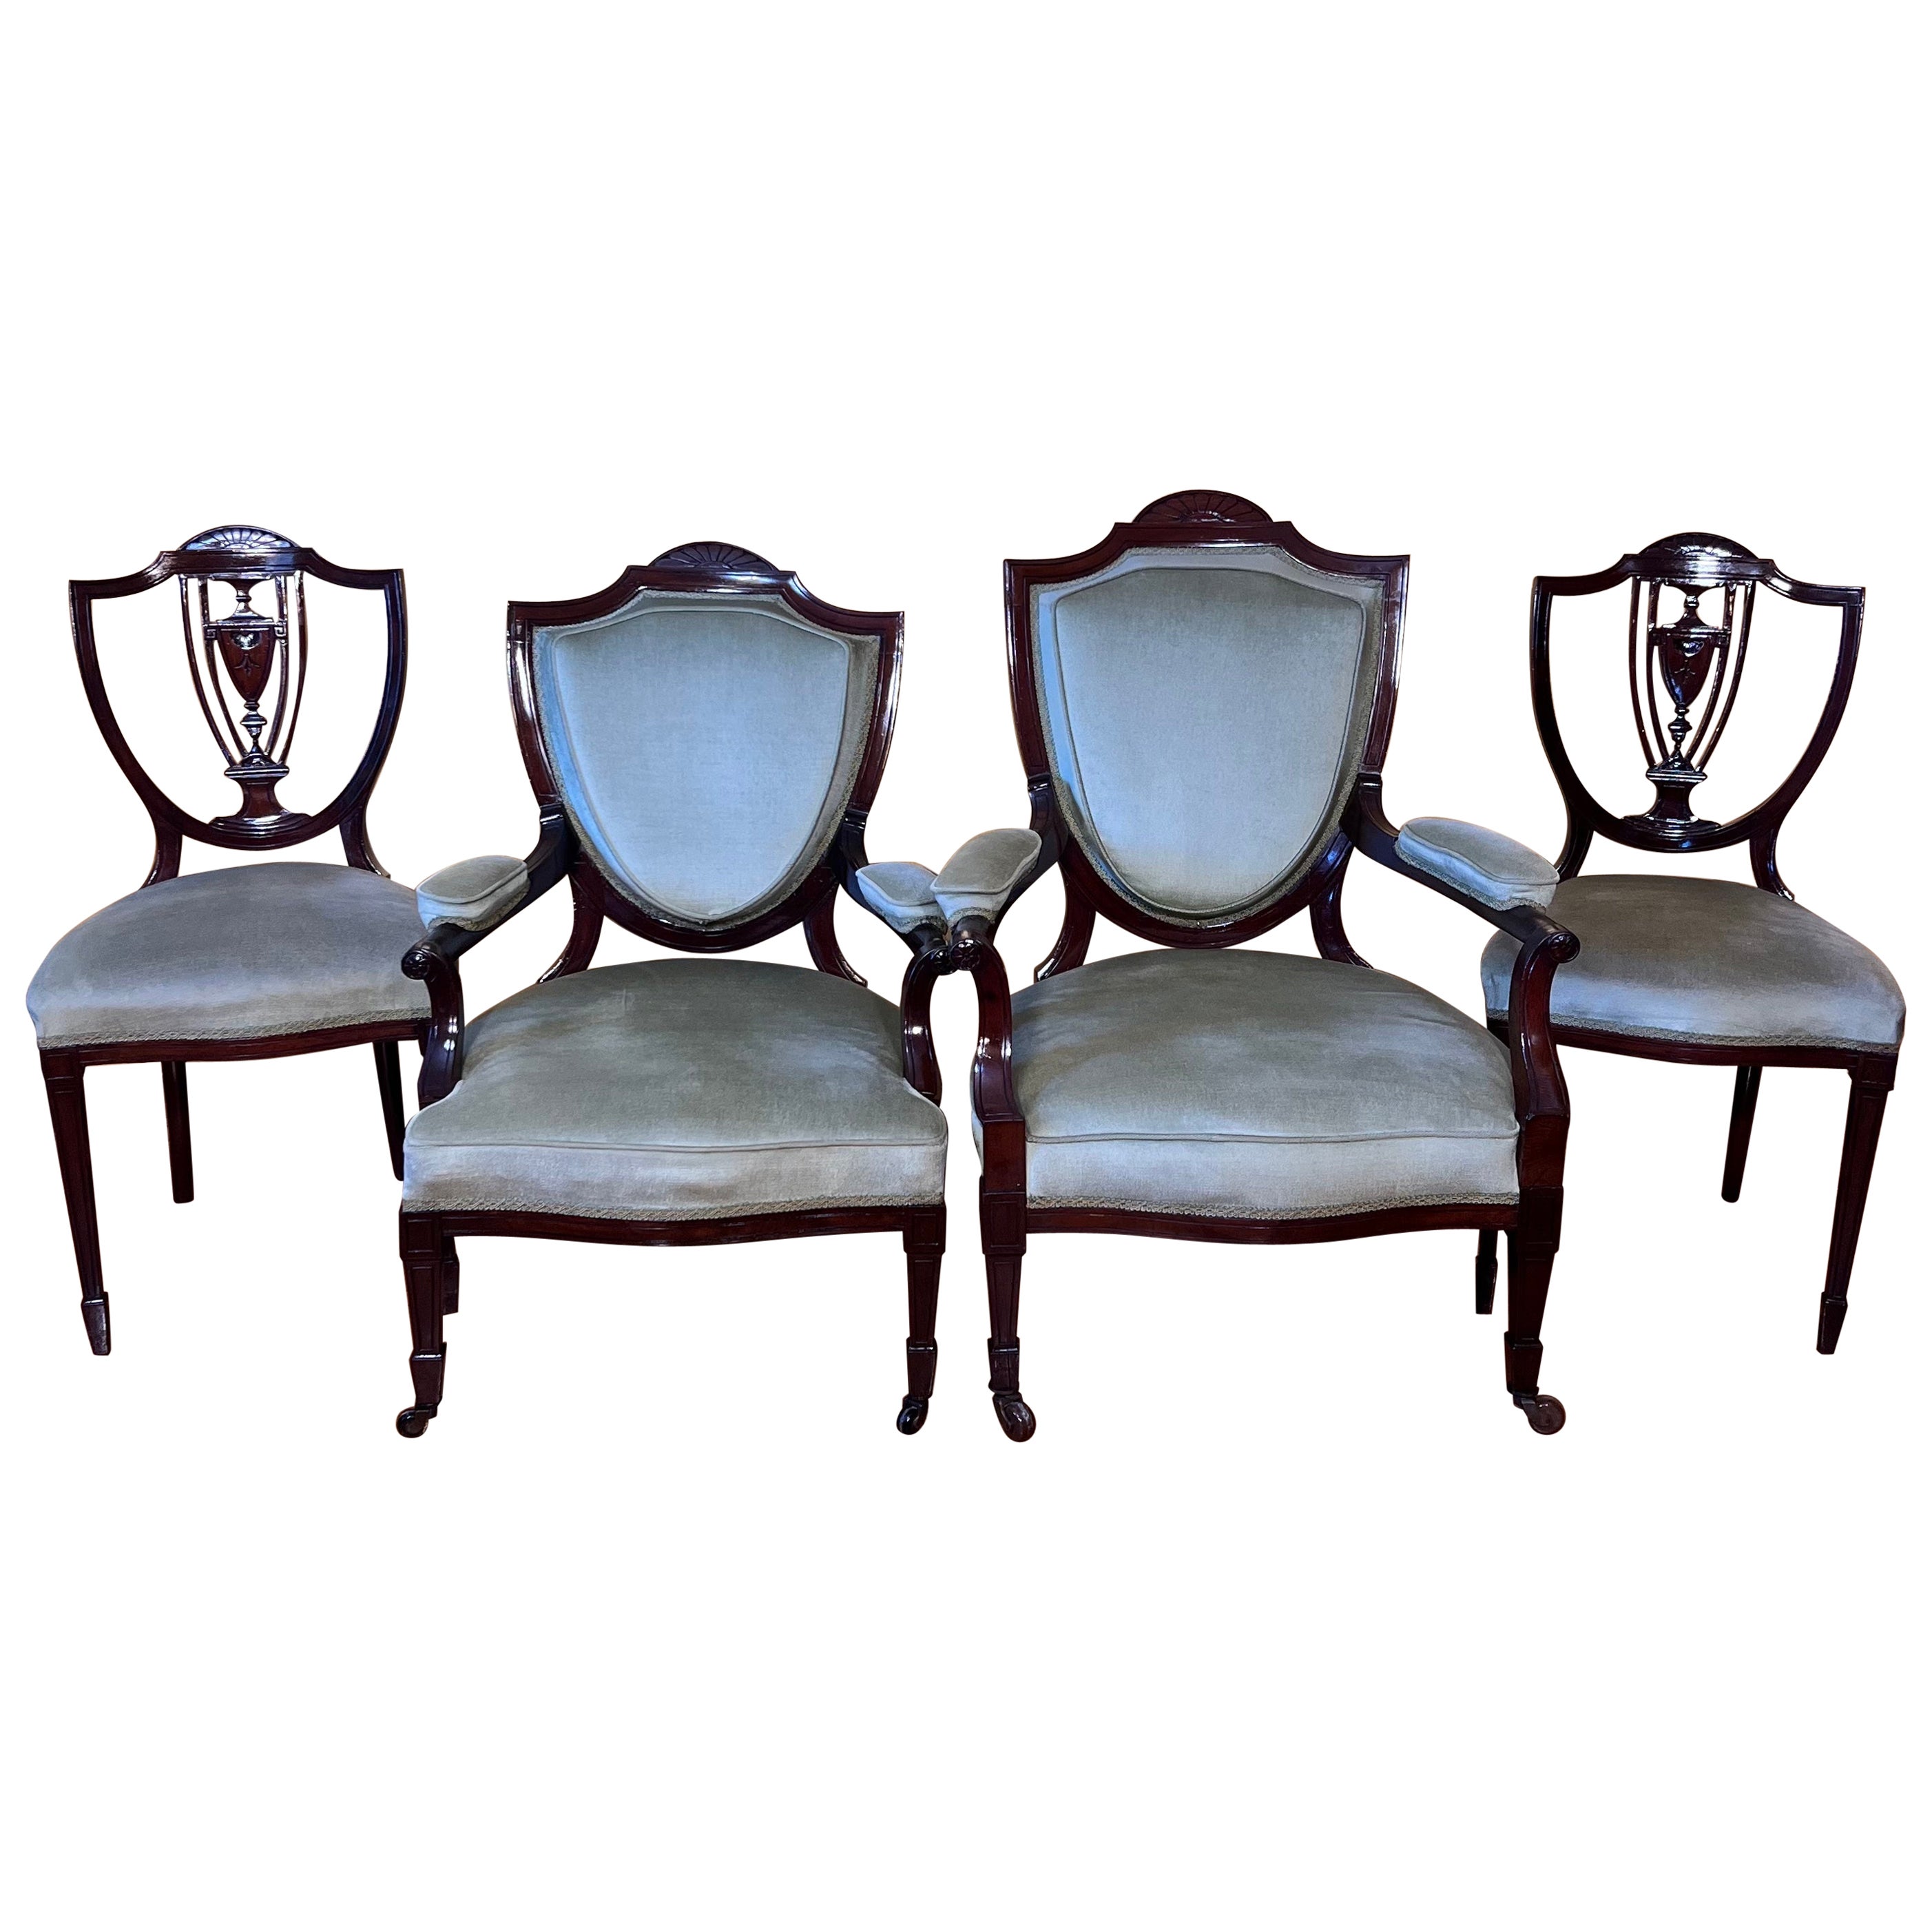 Antique Early 20th Century Walnut Four Piece Chair Set For Sale